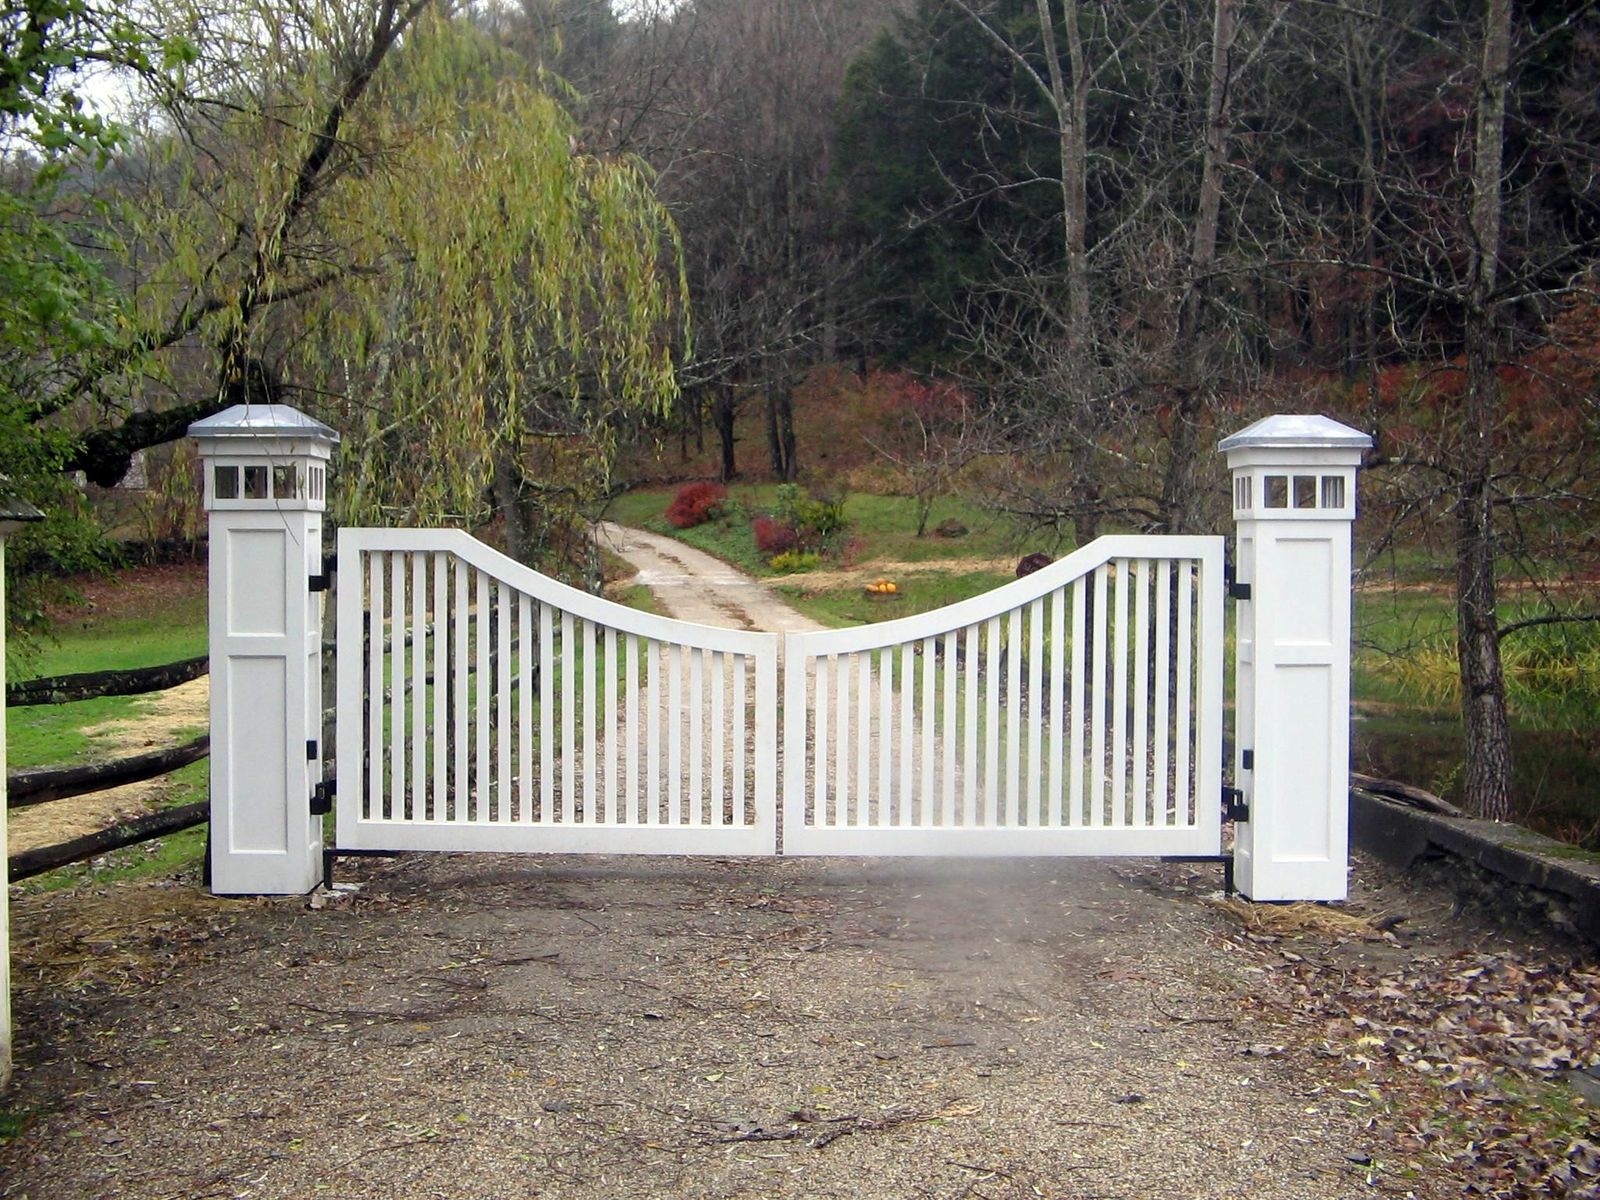 Wooden driveway gate with lighting on posts